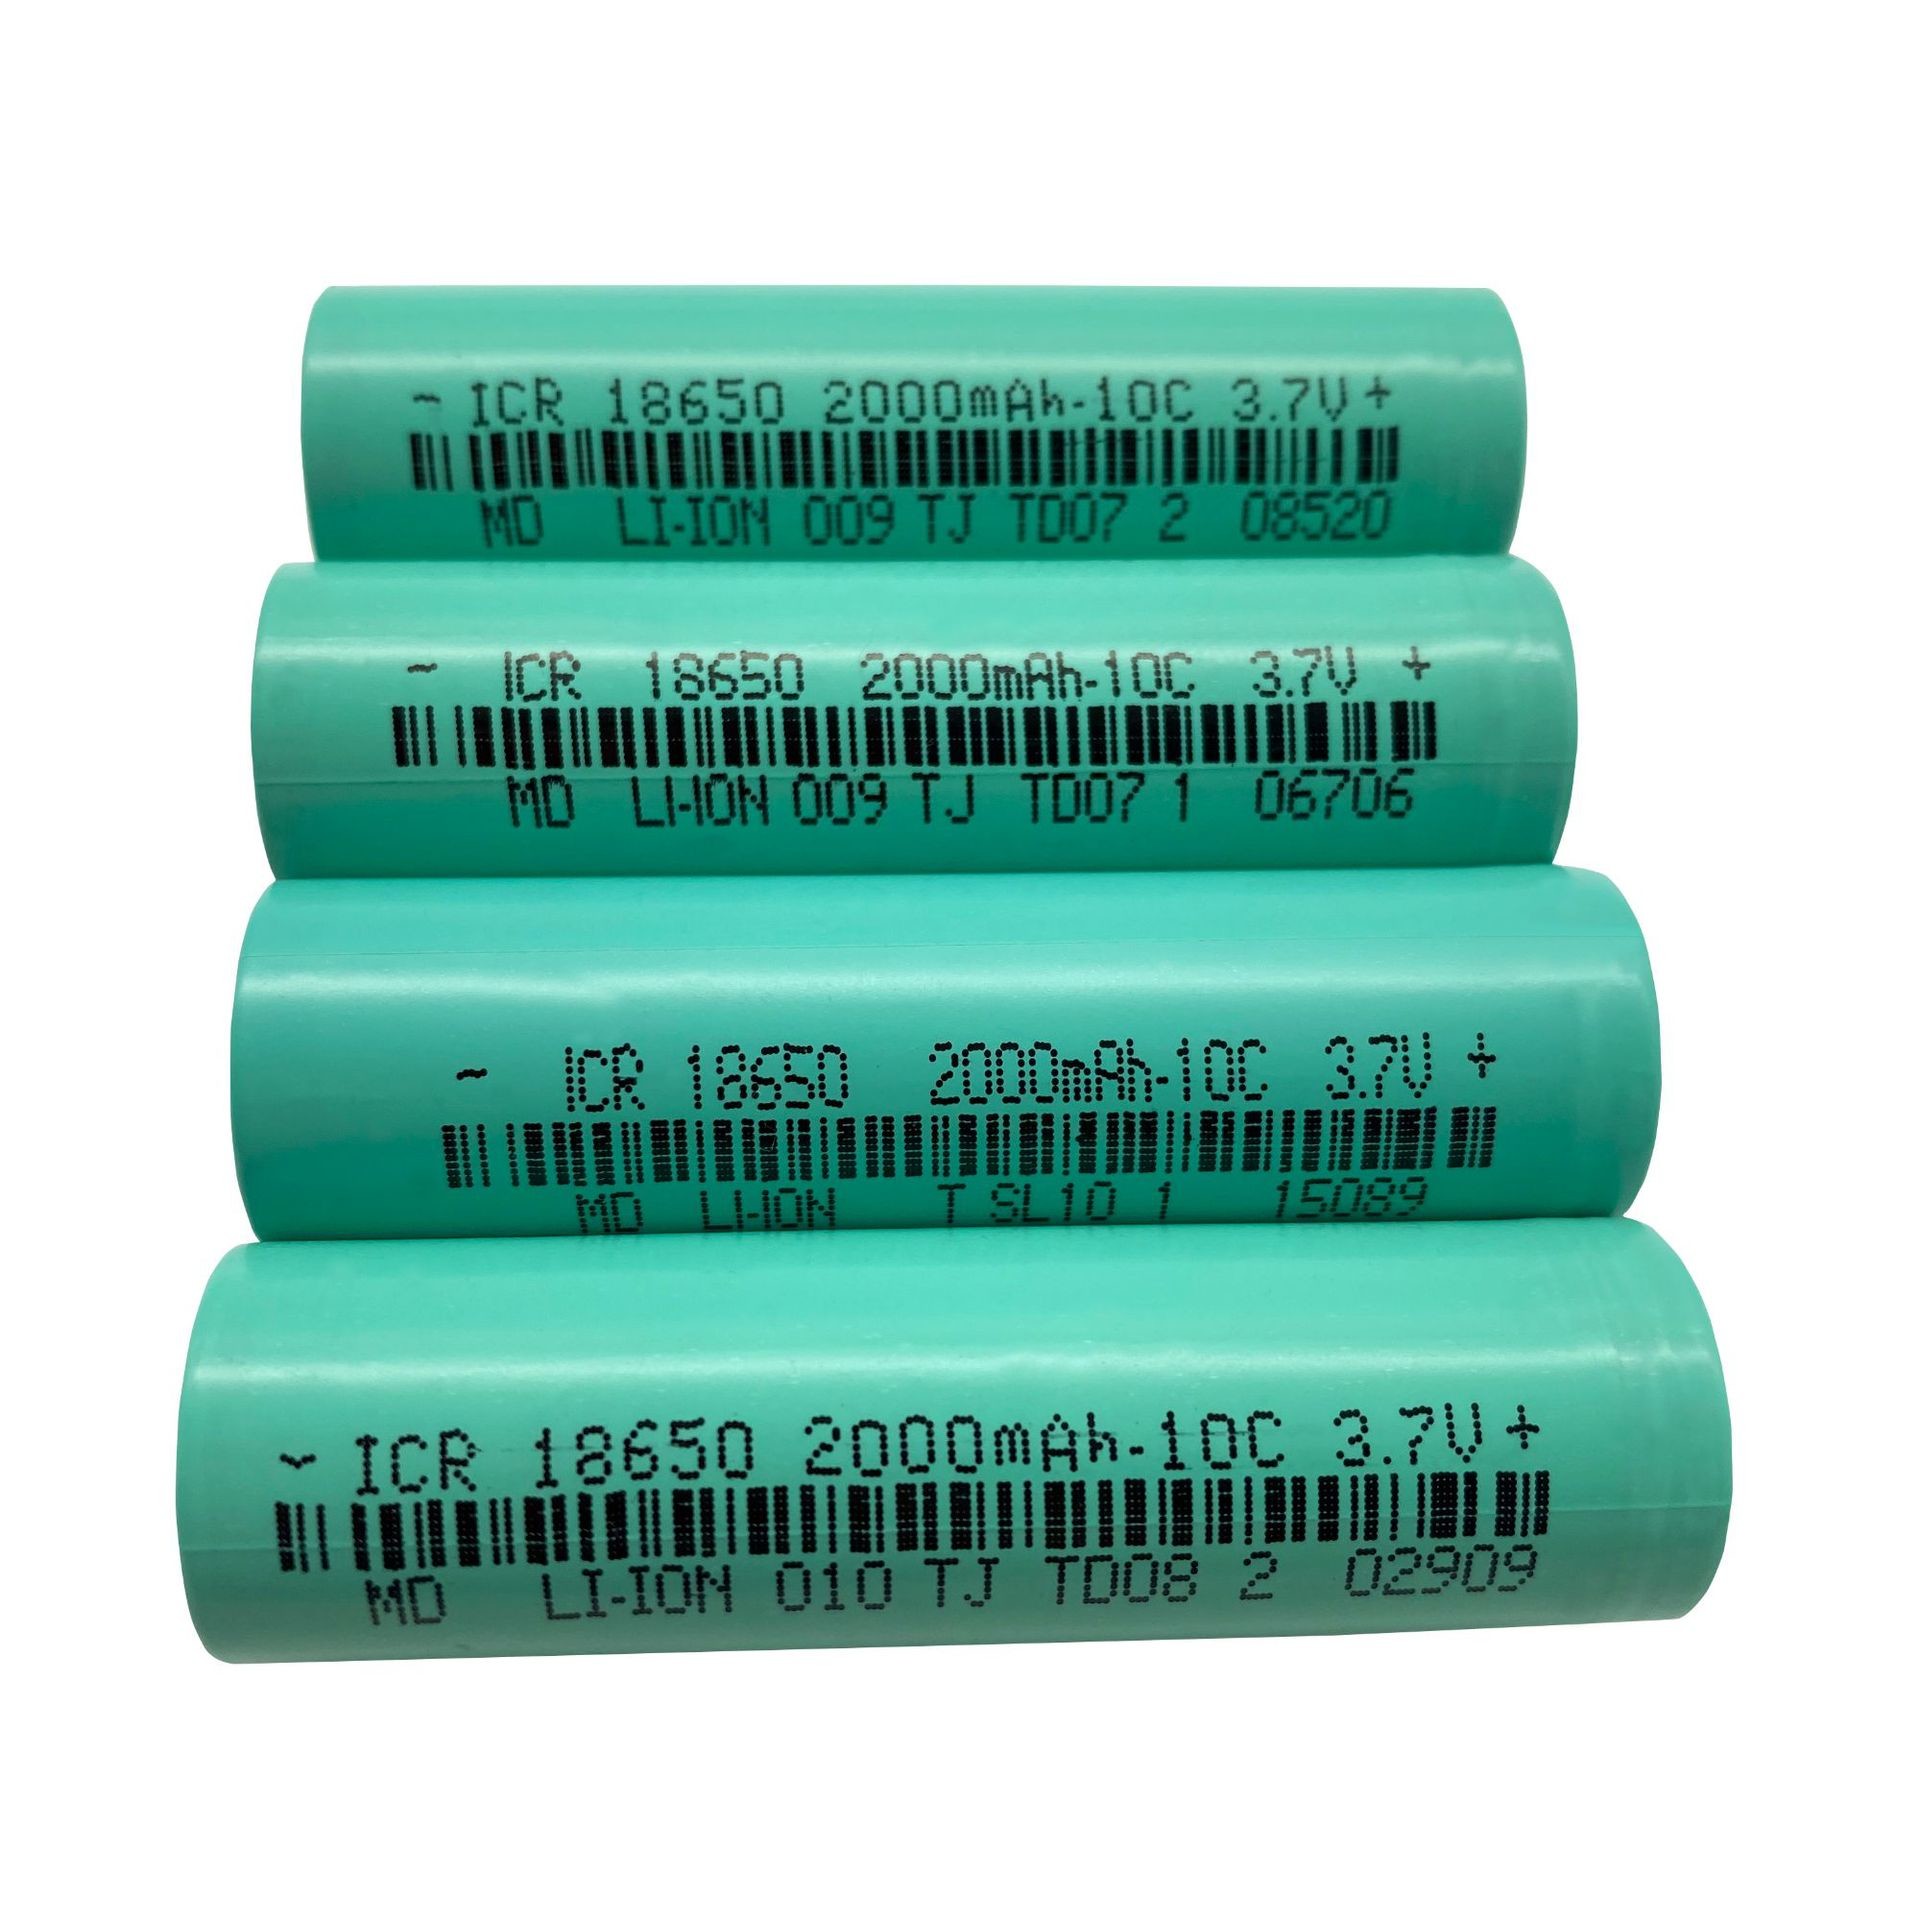  7.4Wh 18650 Li Ion Battery Manufactures